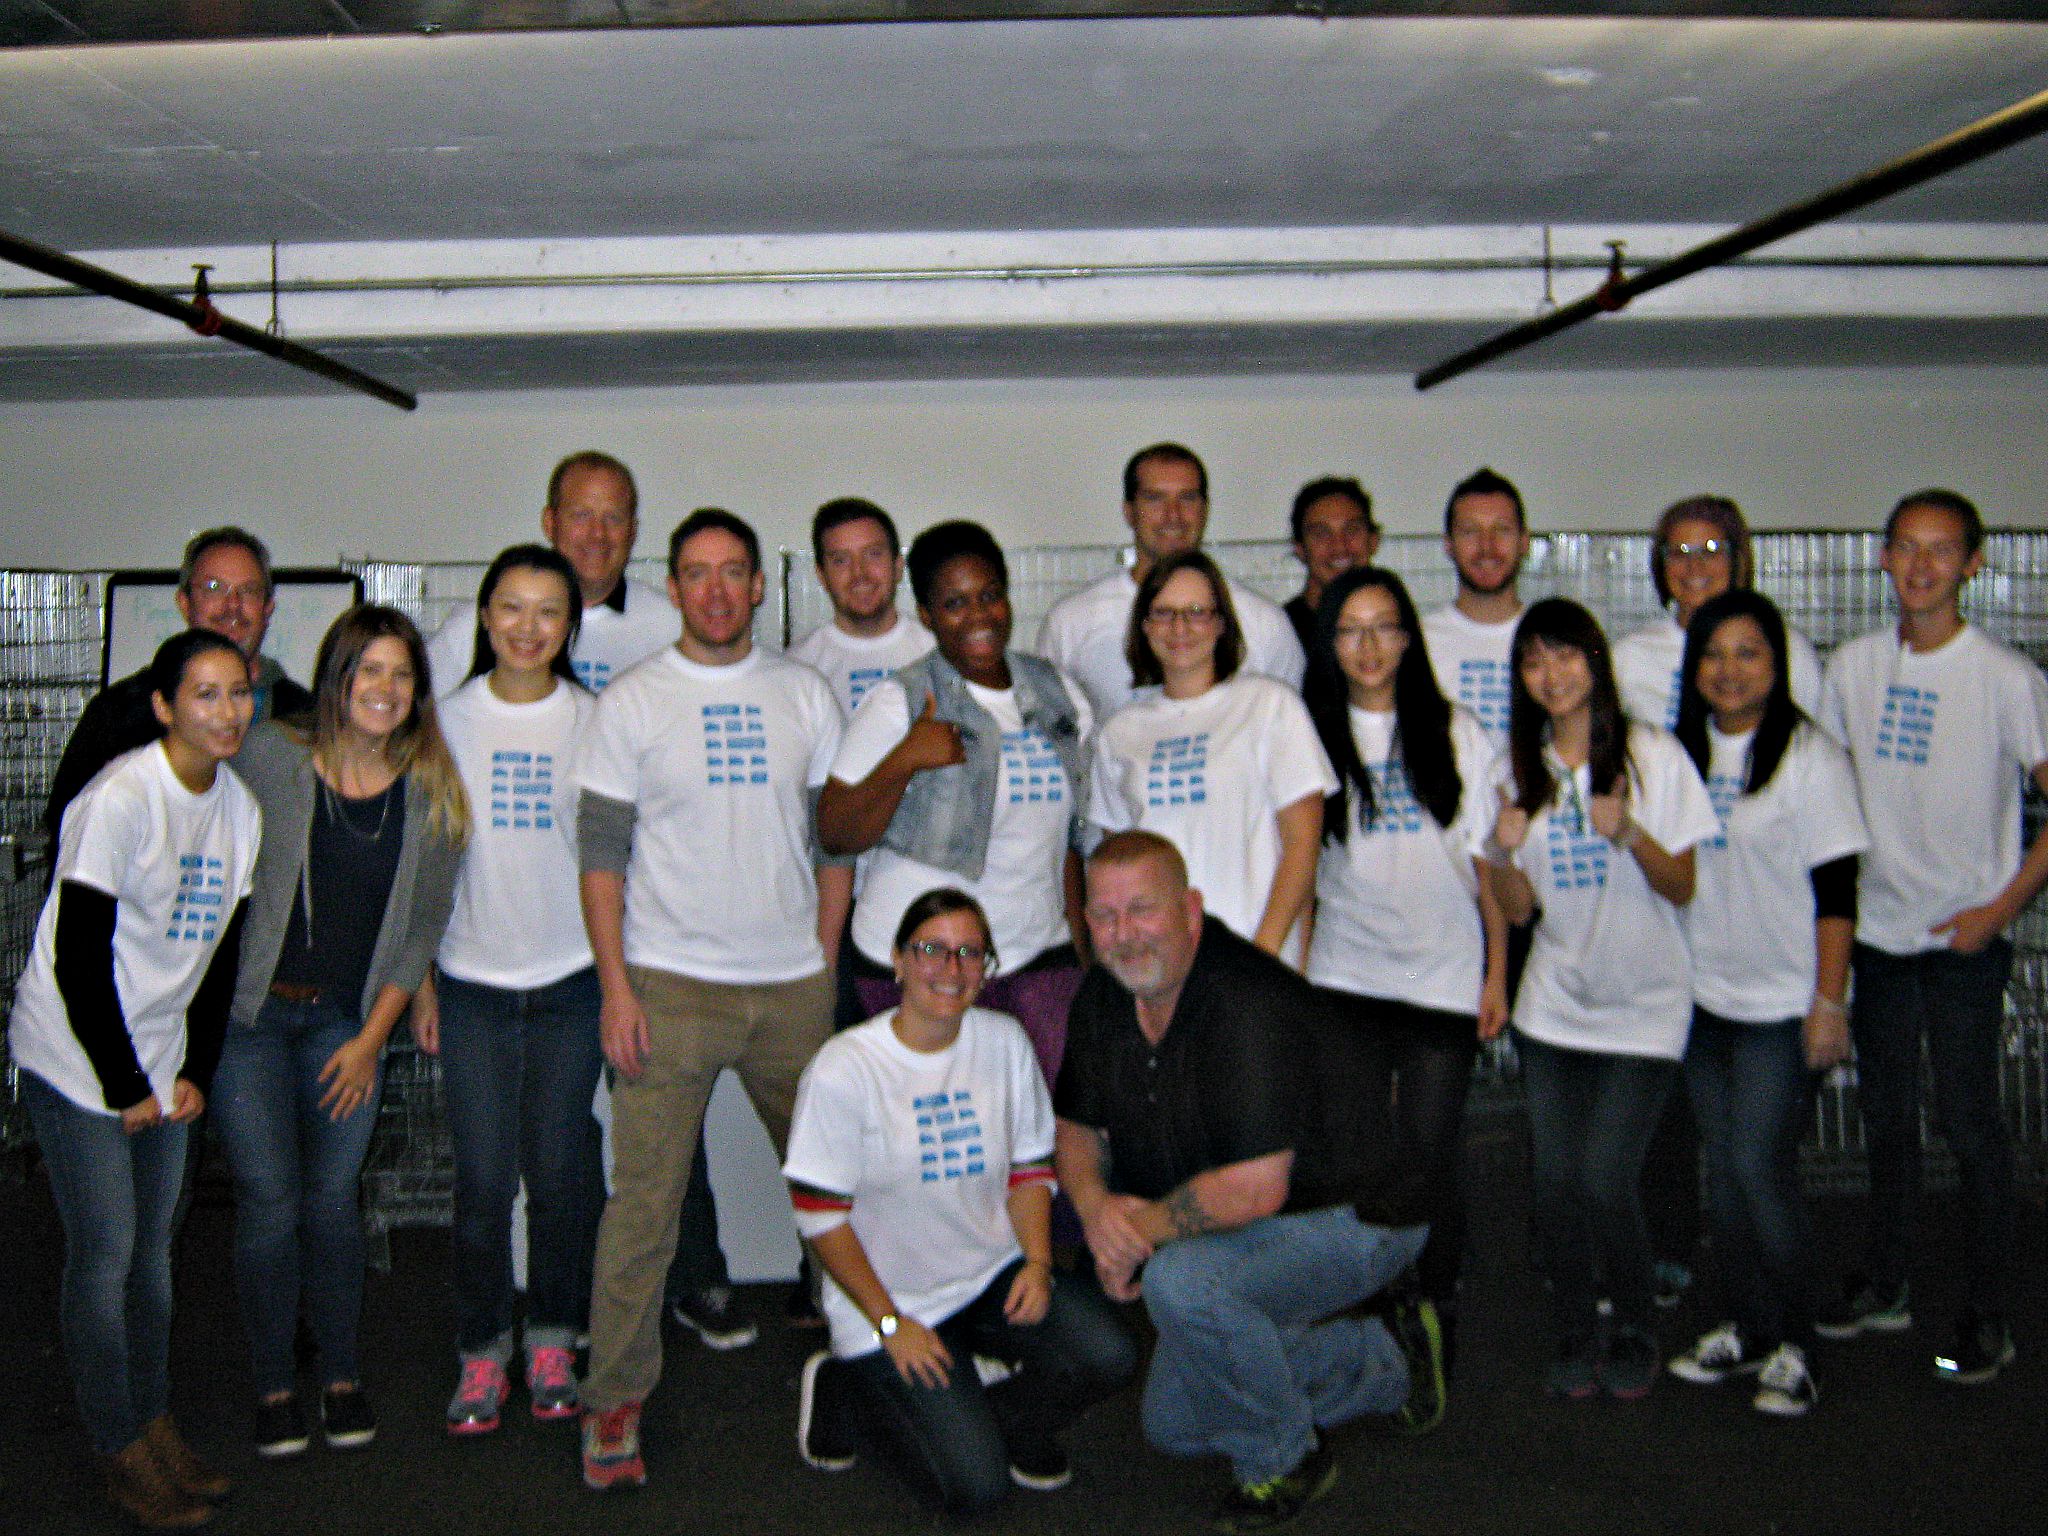 Thanking car2go for volunteering with us